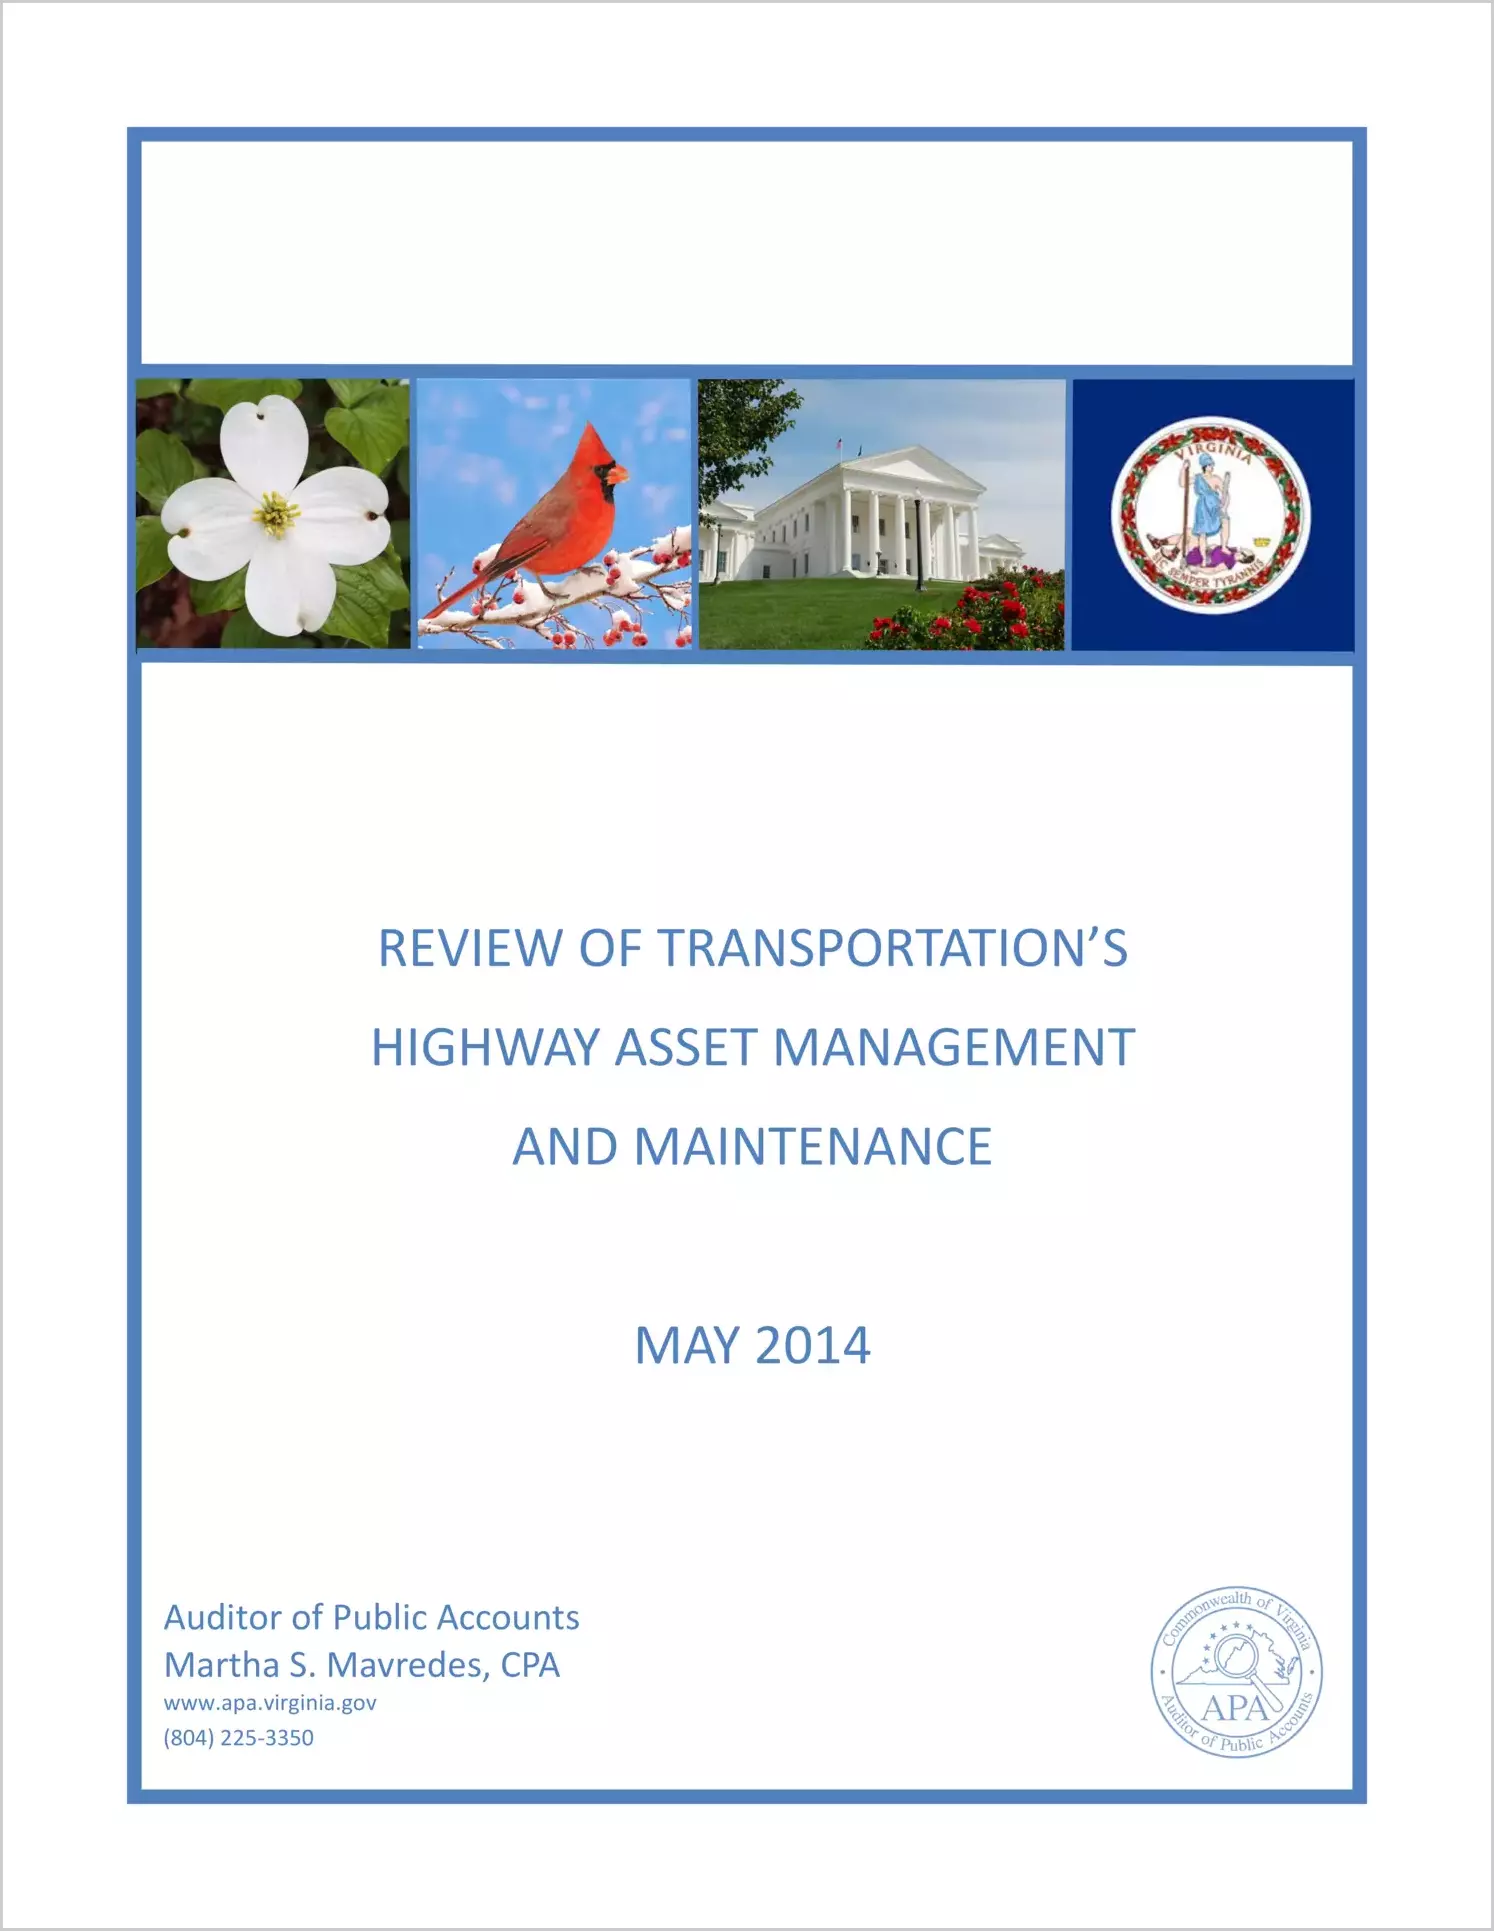 Review of Transportation's Highway Asset Management and Maintenance - May 2014 - FULL REPORT